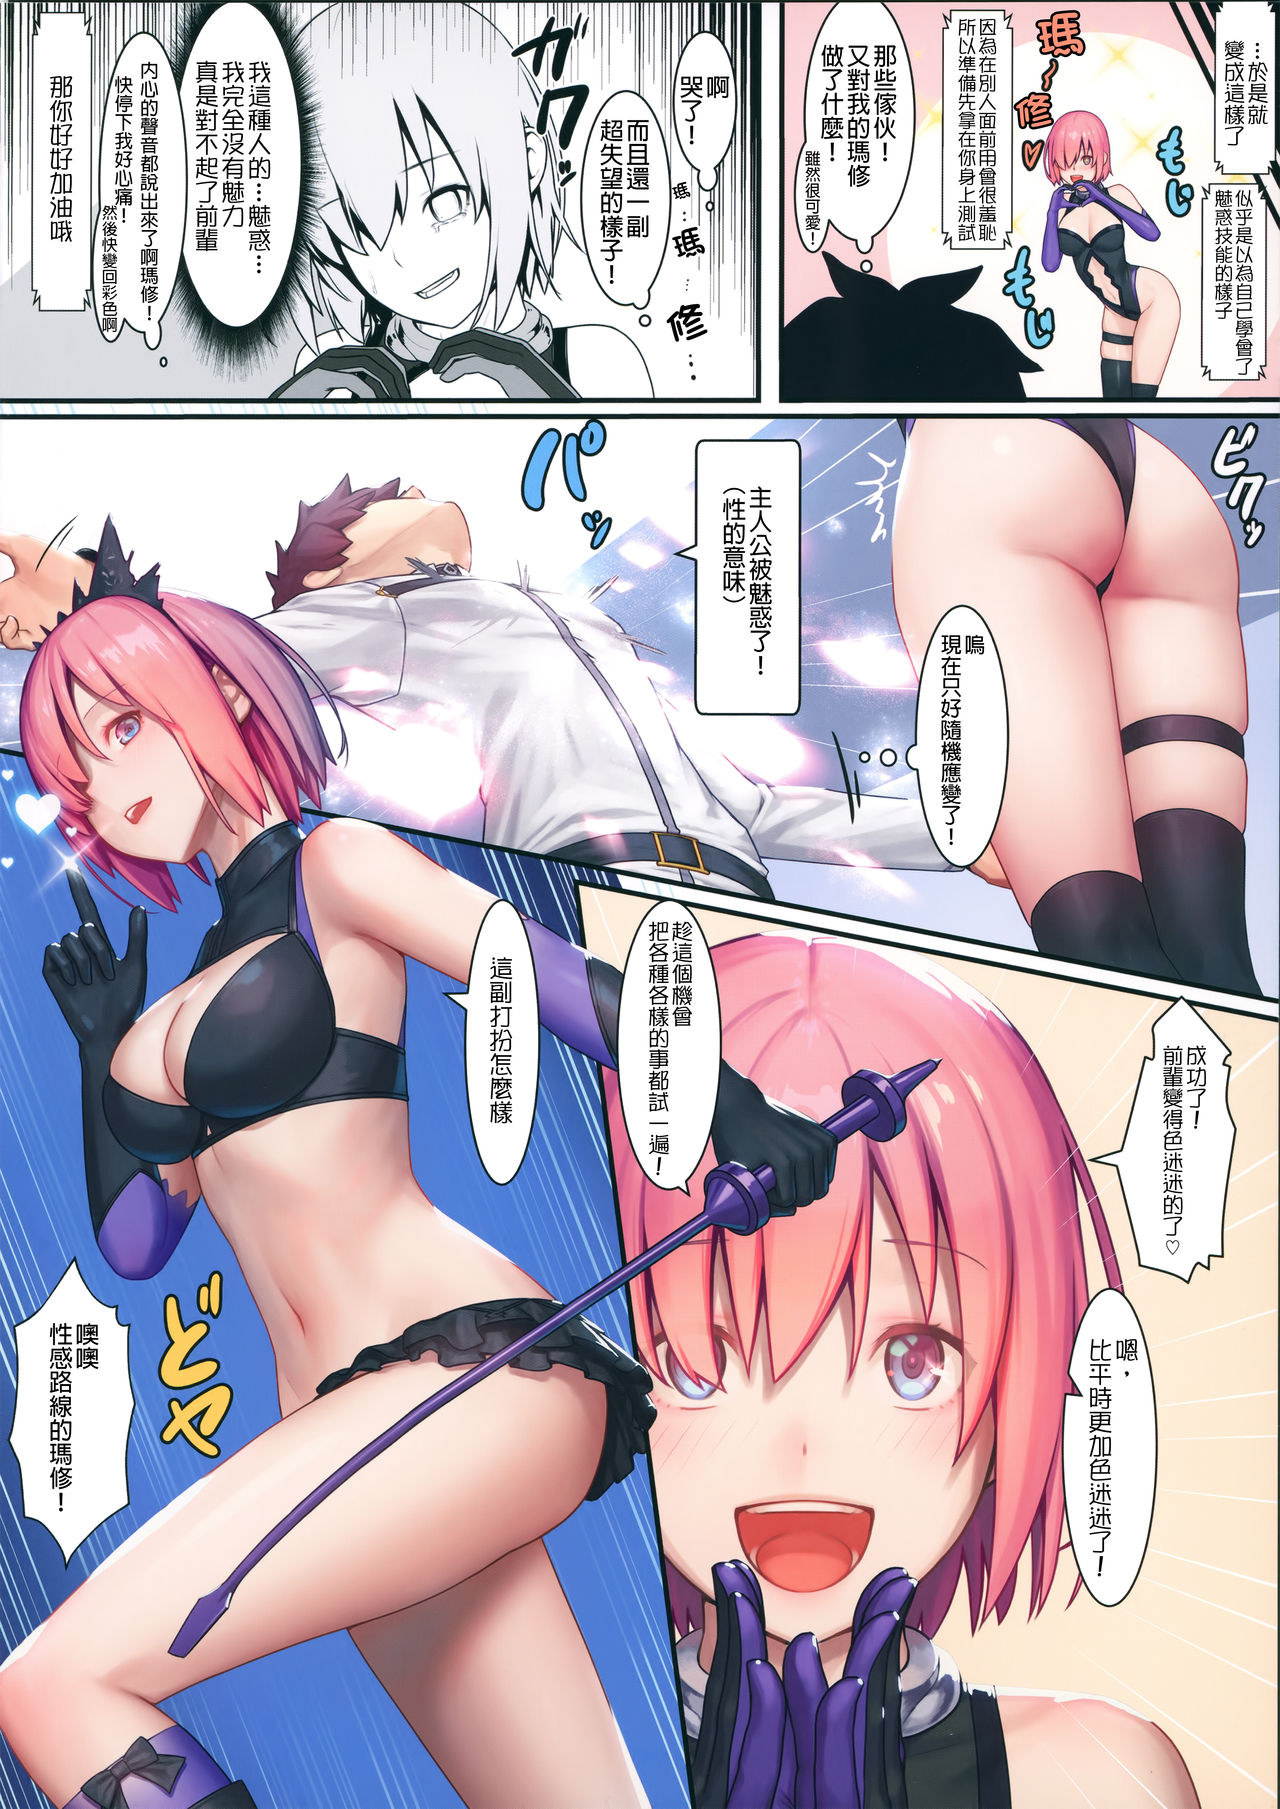 (C95) [Kenja Time (MANA)] Fate/Gentle Order 4 "Lily" (Fate/Grand Order) [Chinese] [谜之汉化组X·Alter&无毒気汉化组] (C95) [けんじゃたいむ (MANA)] Fate/Gentle Order 4「リリィ」 (Fate/Grand Order) [中国翻訳]